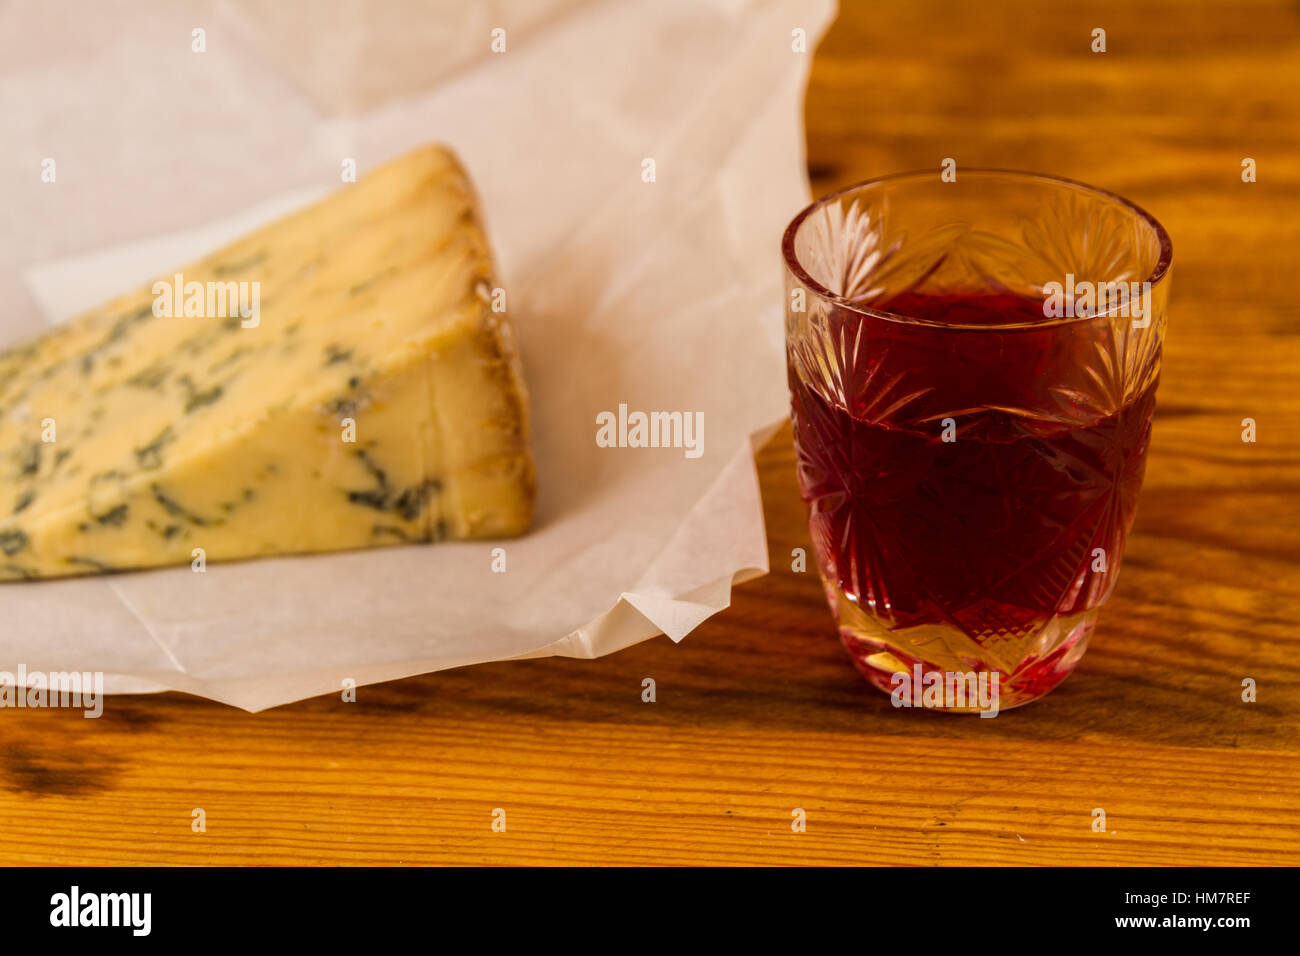 Shot glass with slow gin, beside a wedge of stilton cheese unwrapped greaseproof paper. Stock Photo